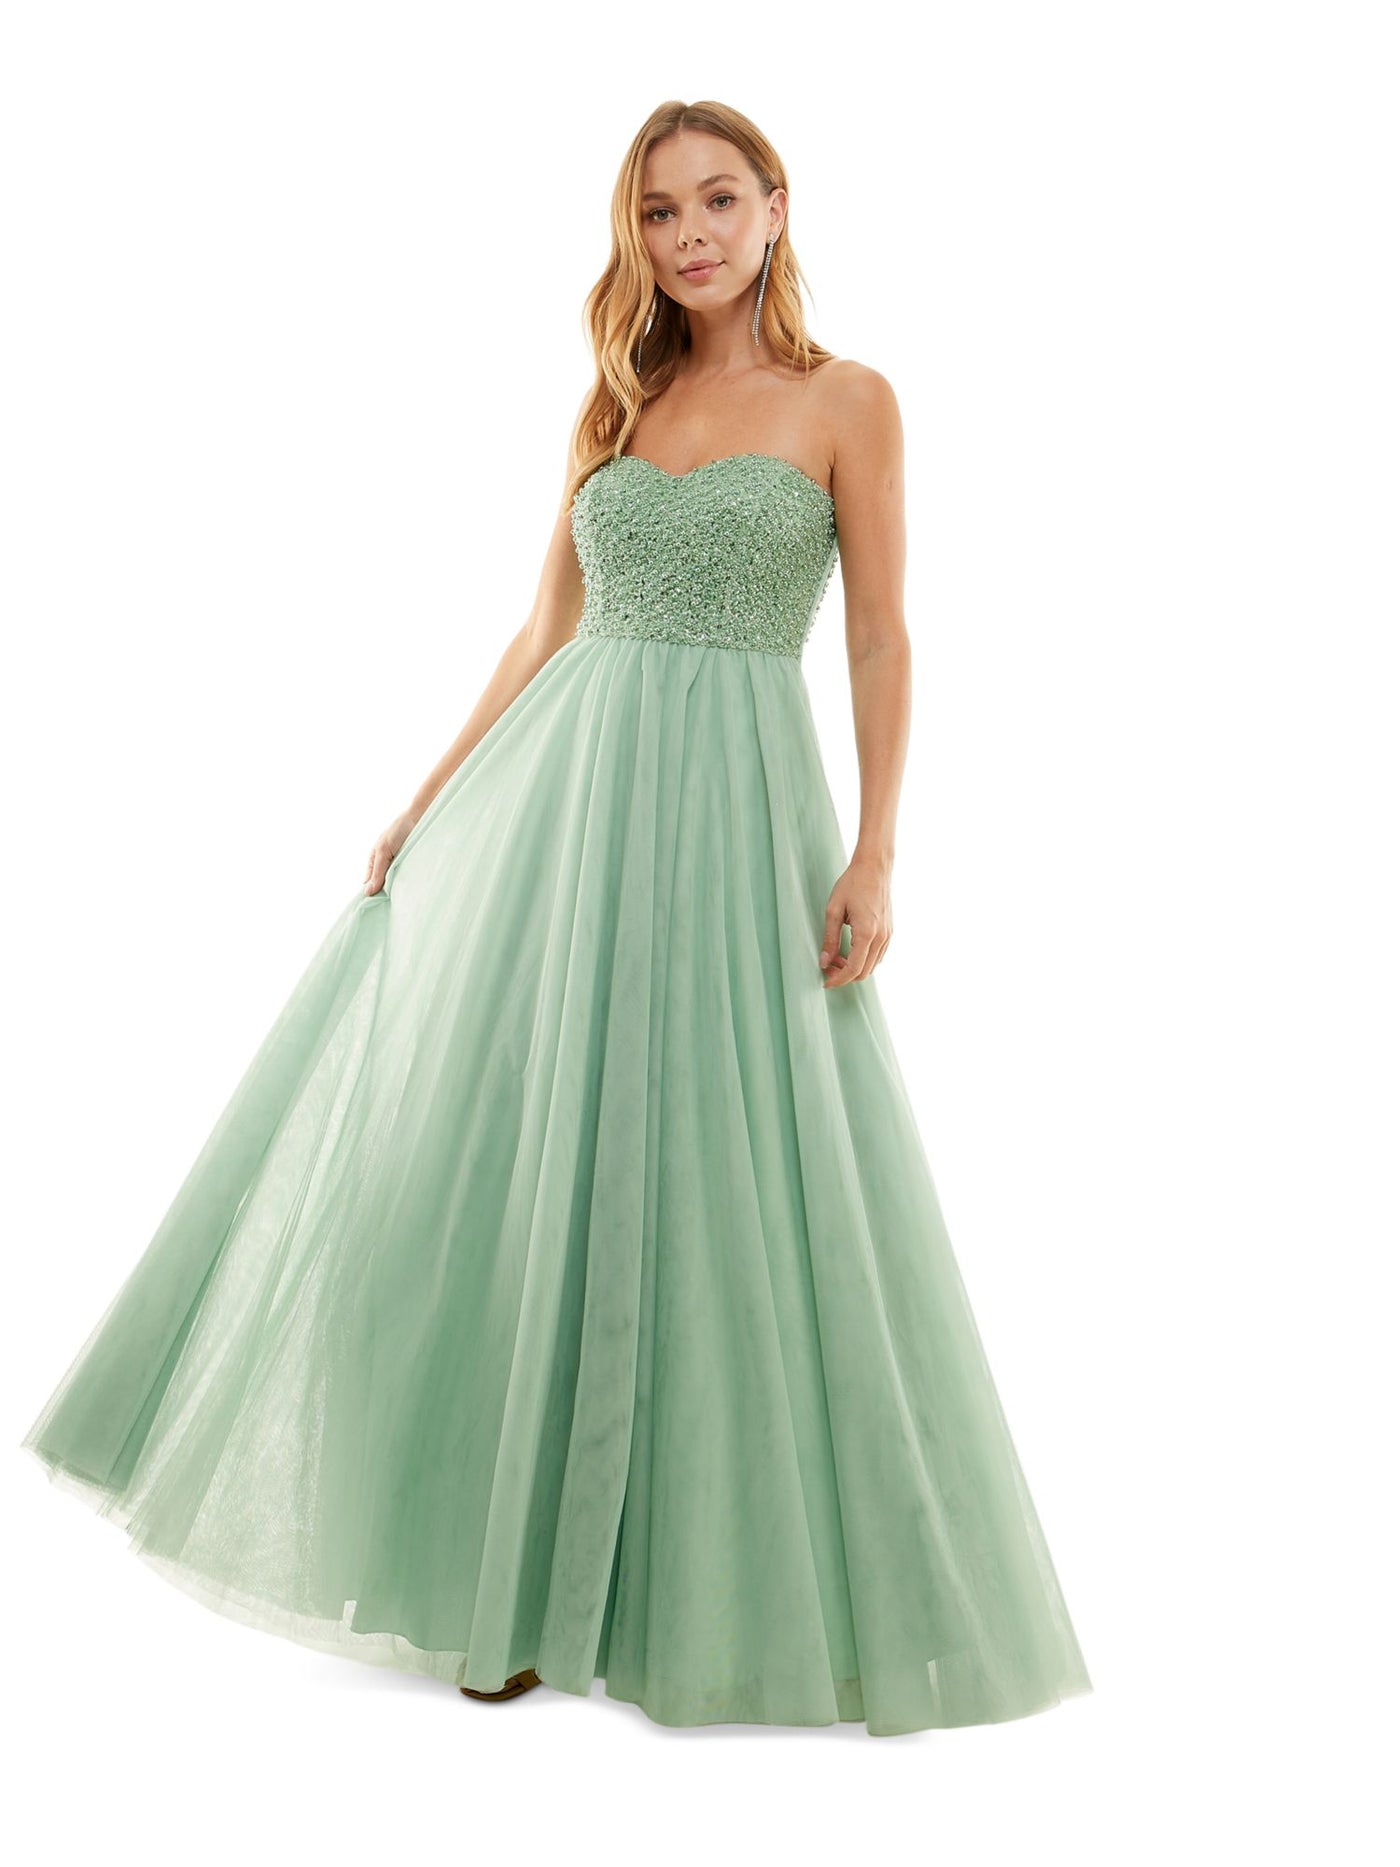 SAY YES TO THE PROM Womens Green Embellished Zippered Padded Lined Tulle Mesh Sleeveless Sweetheart Neckline Full-Length Party Gown Dress Juniors 9